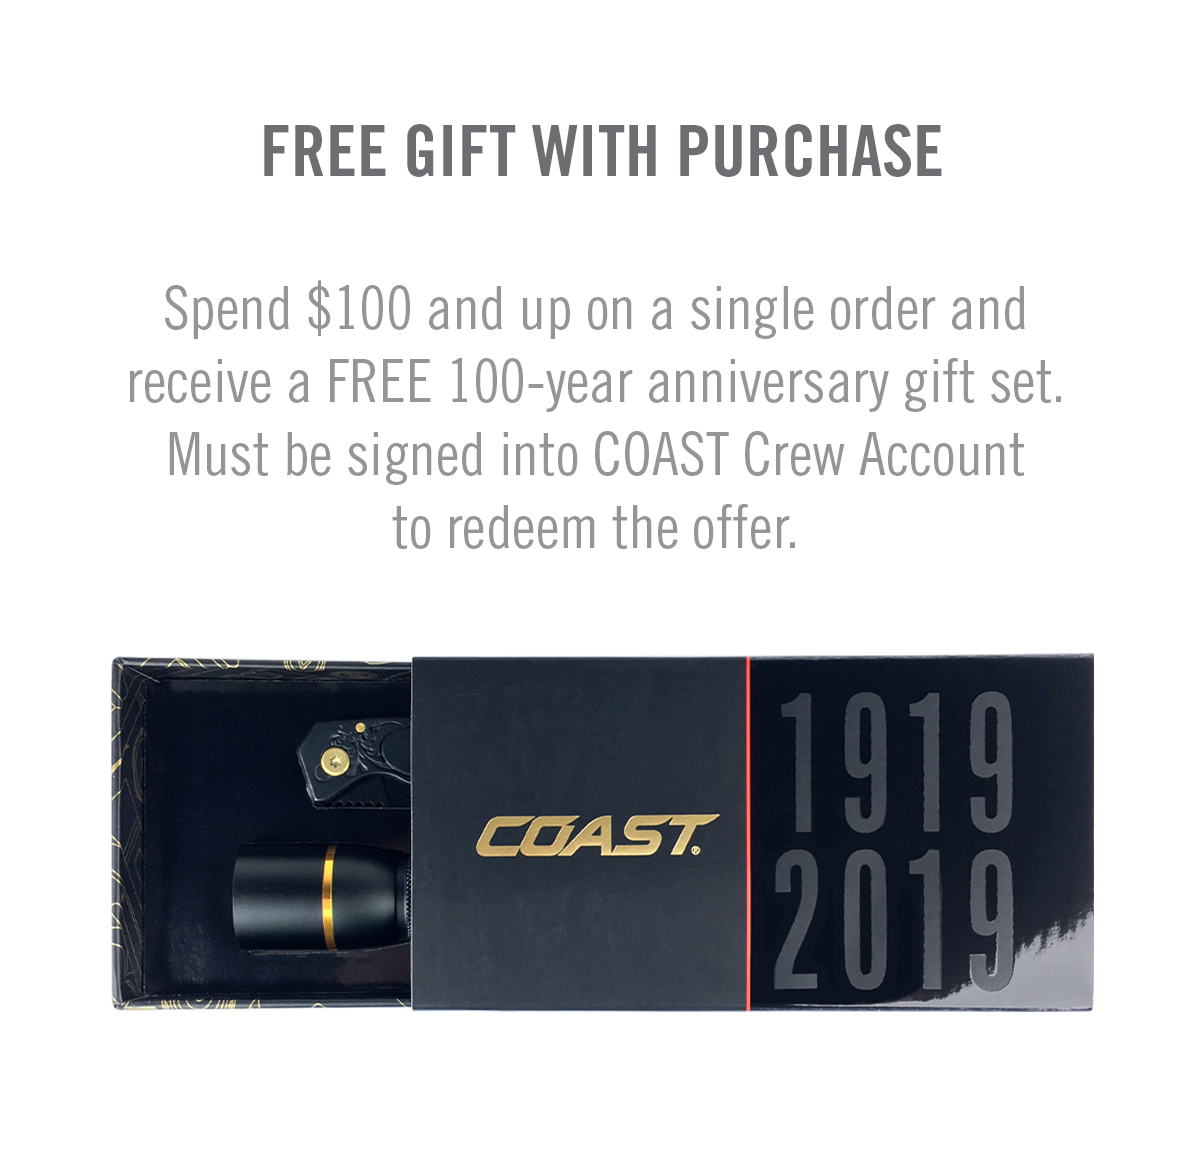 Free gift with $100 purchase